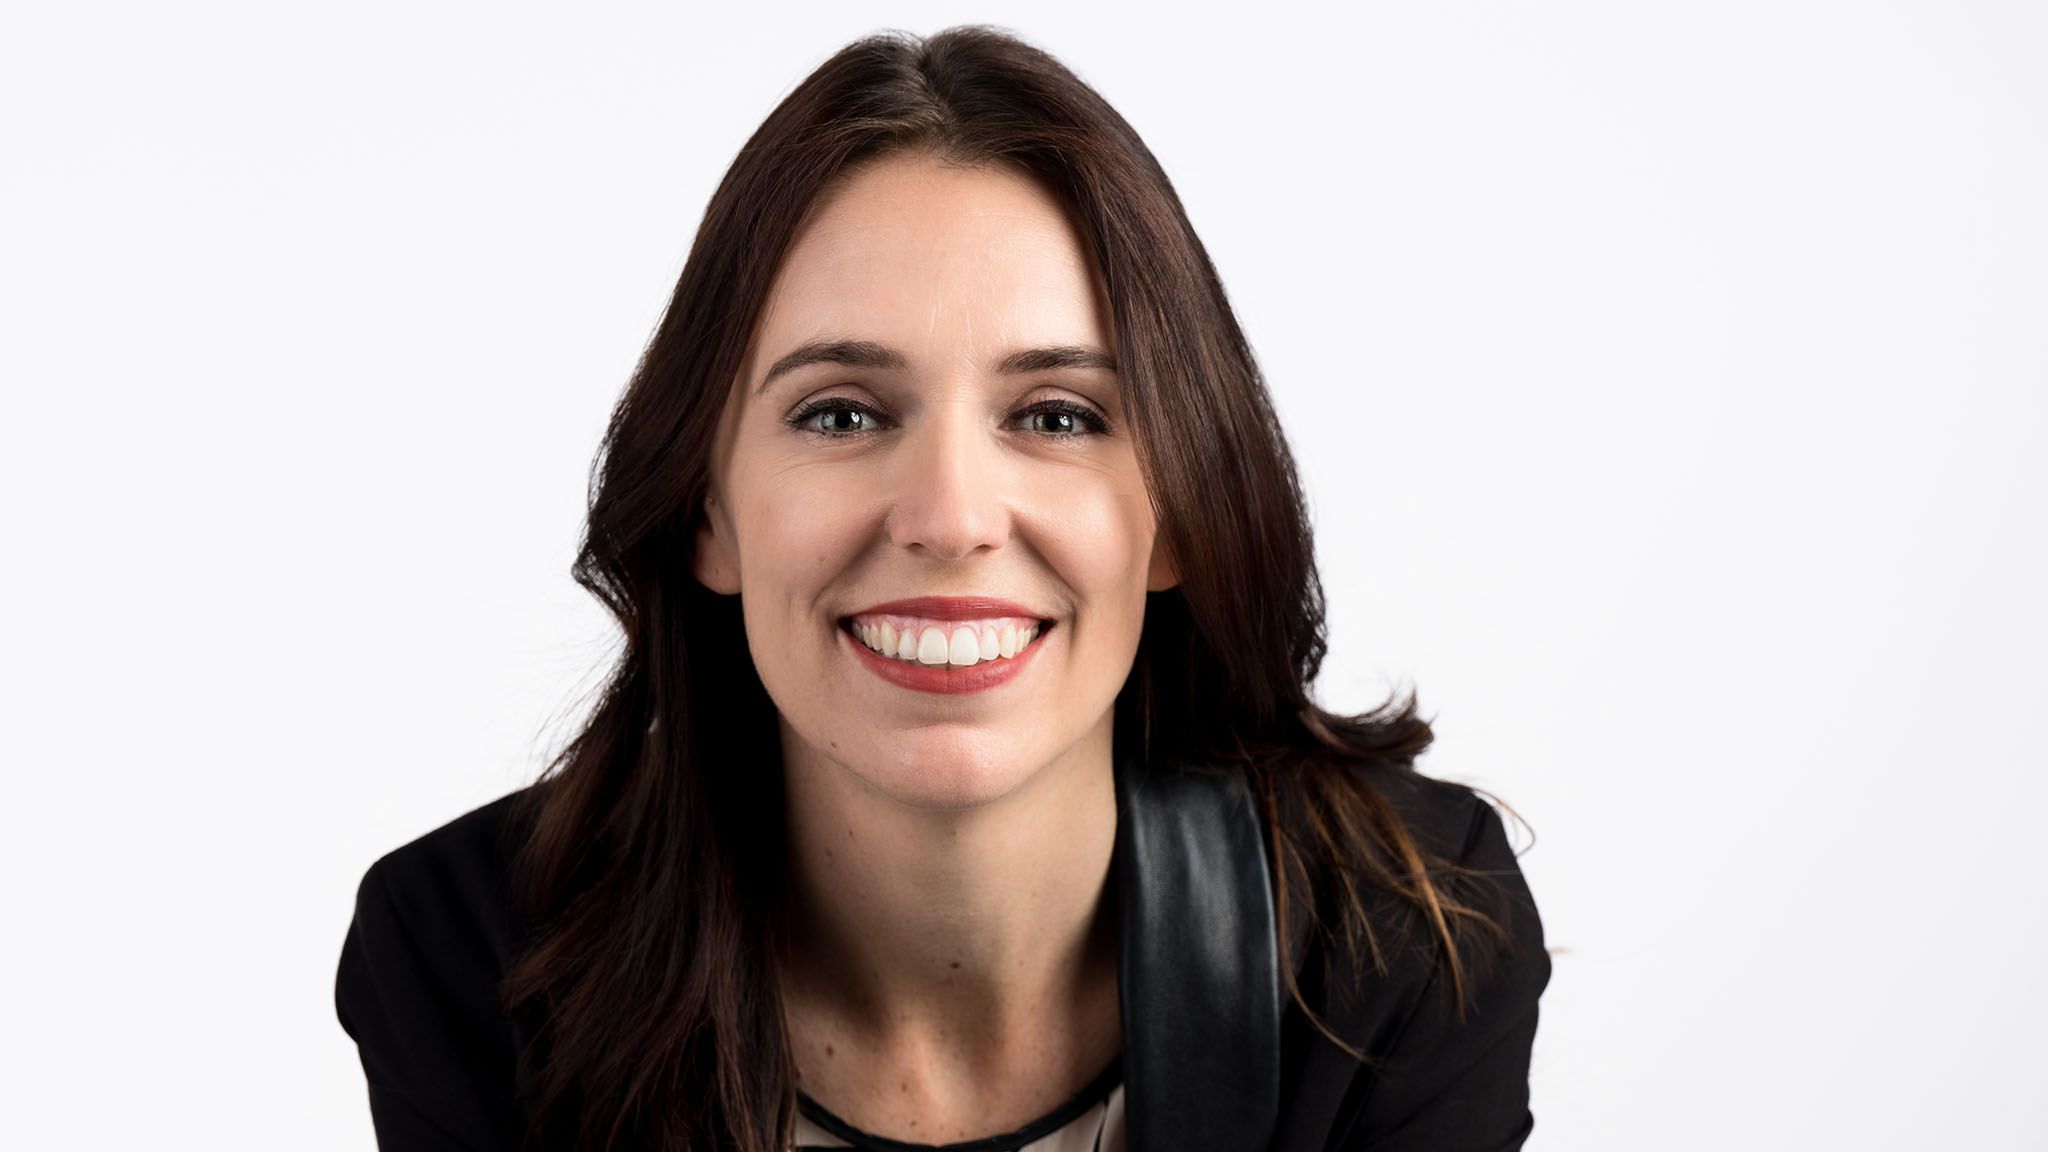 New Zealand PM Jacinda Ardern on the need for more women in politics